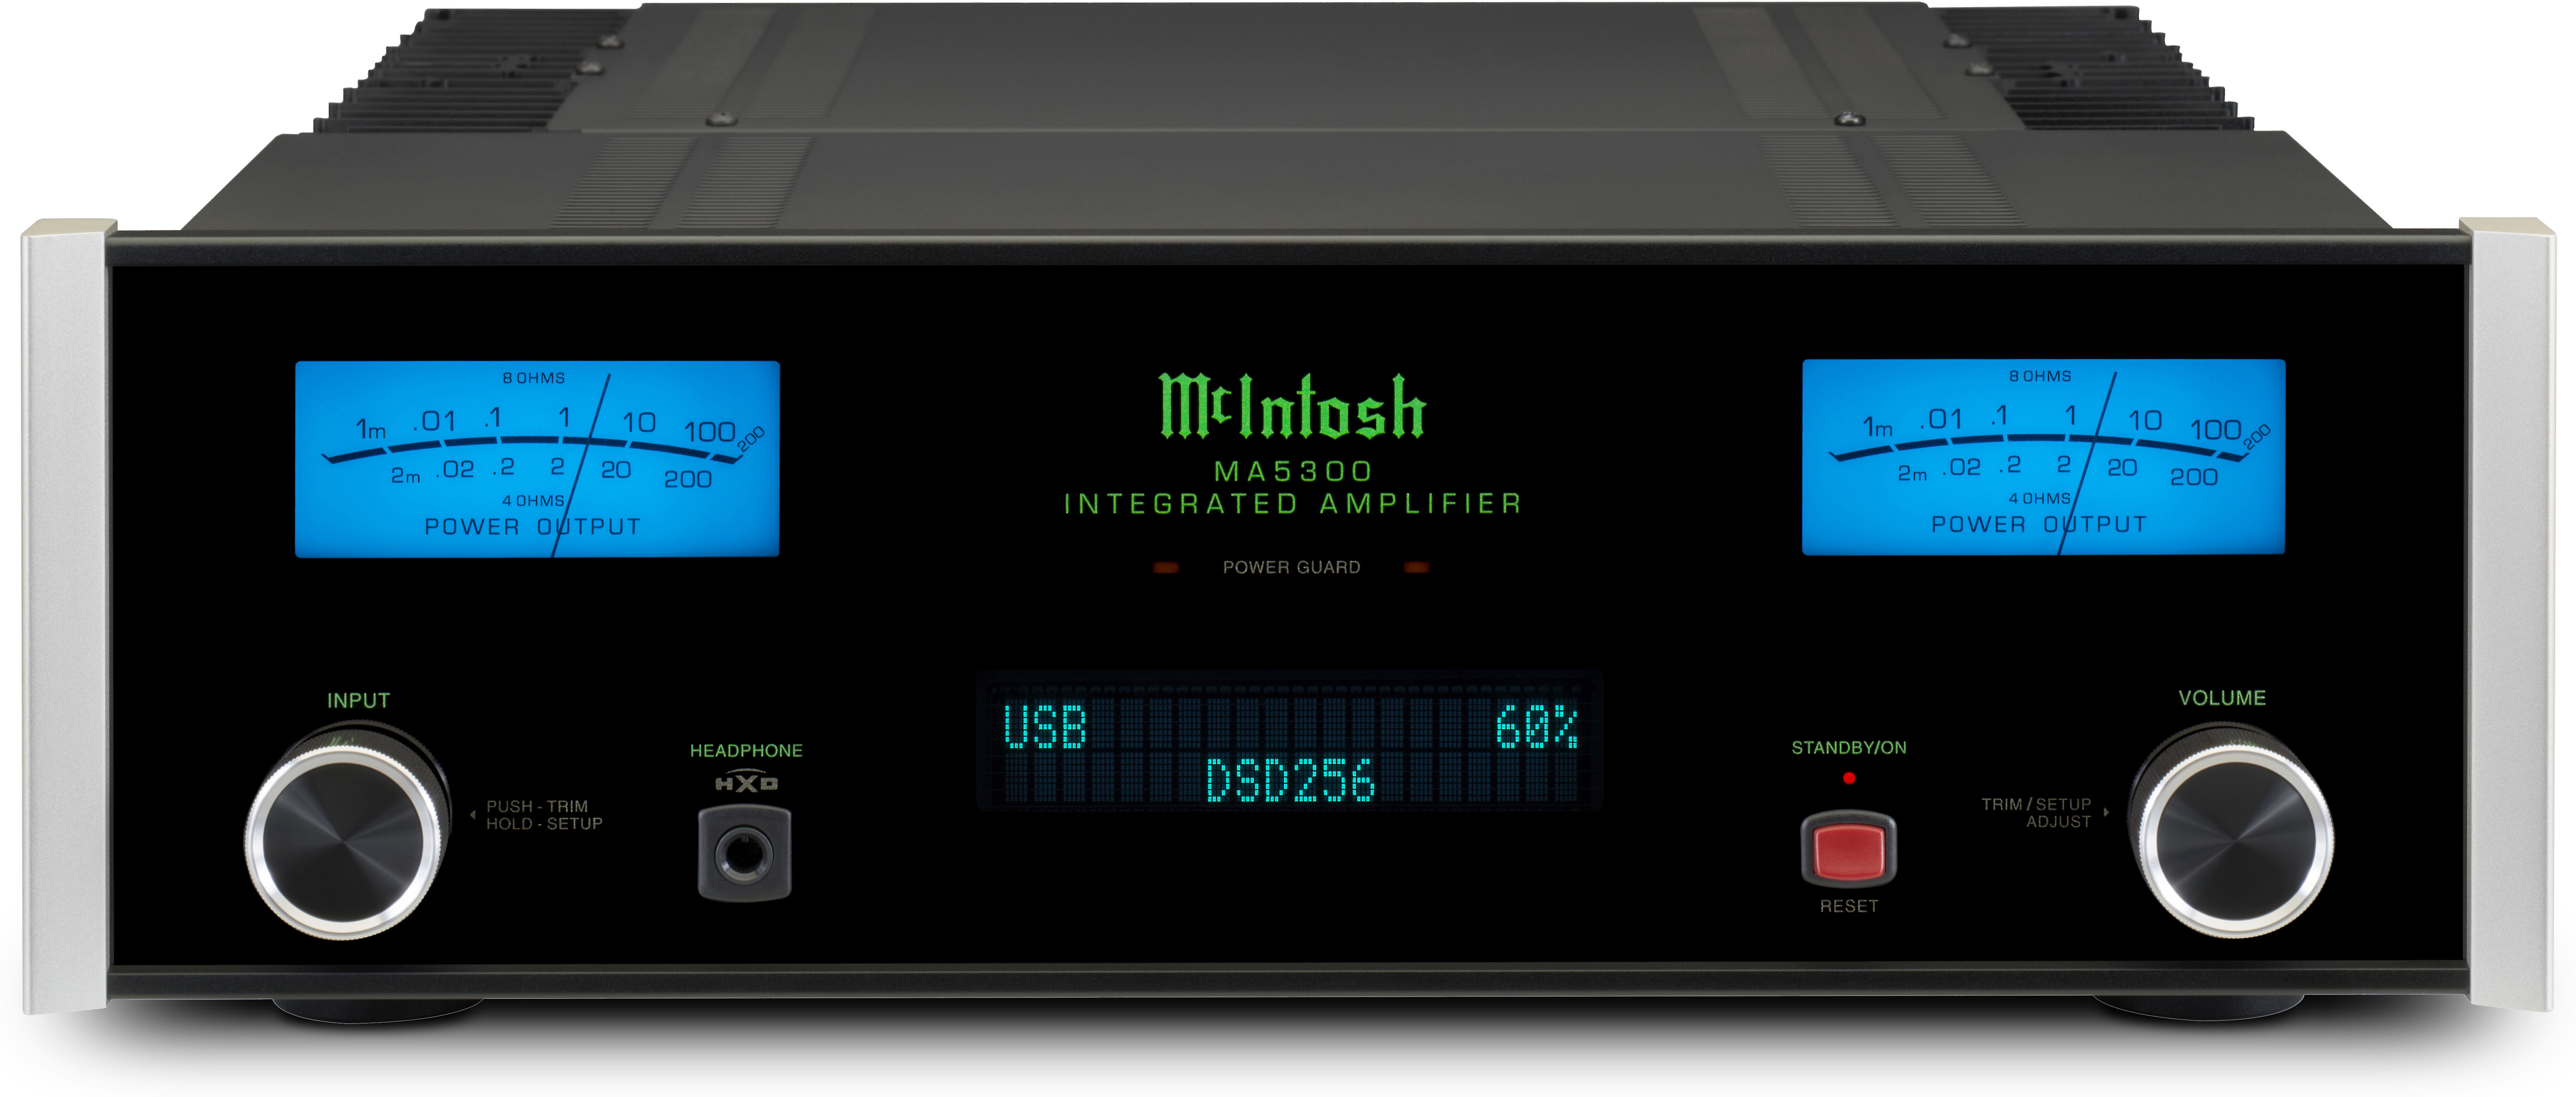 Customer Reviews McIntosh MA5300 Stereo integrated amplifier with